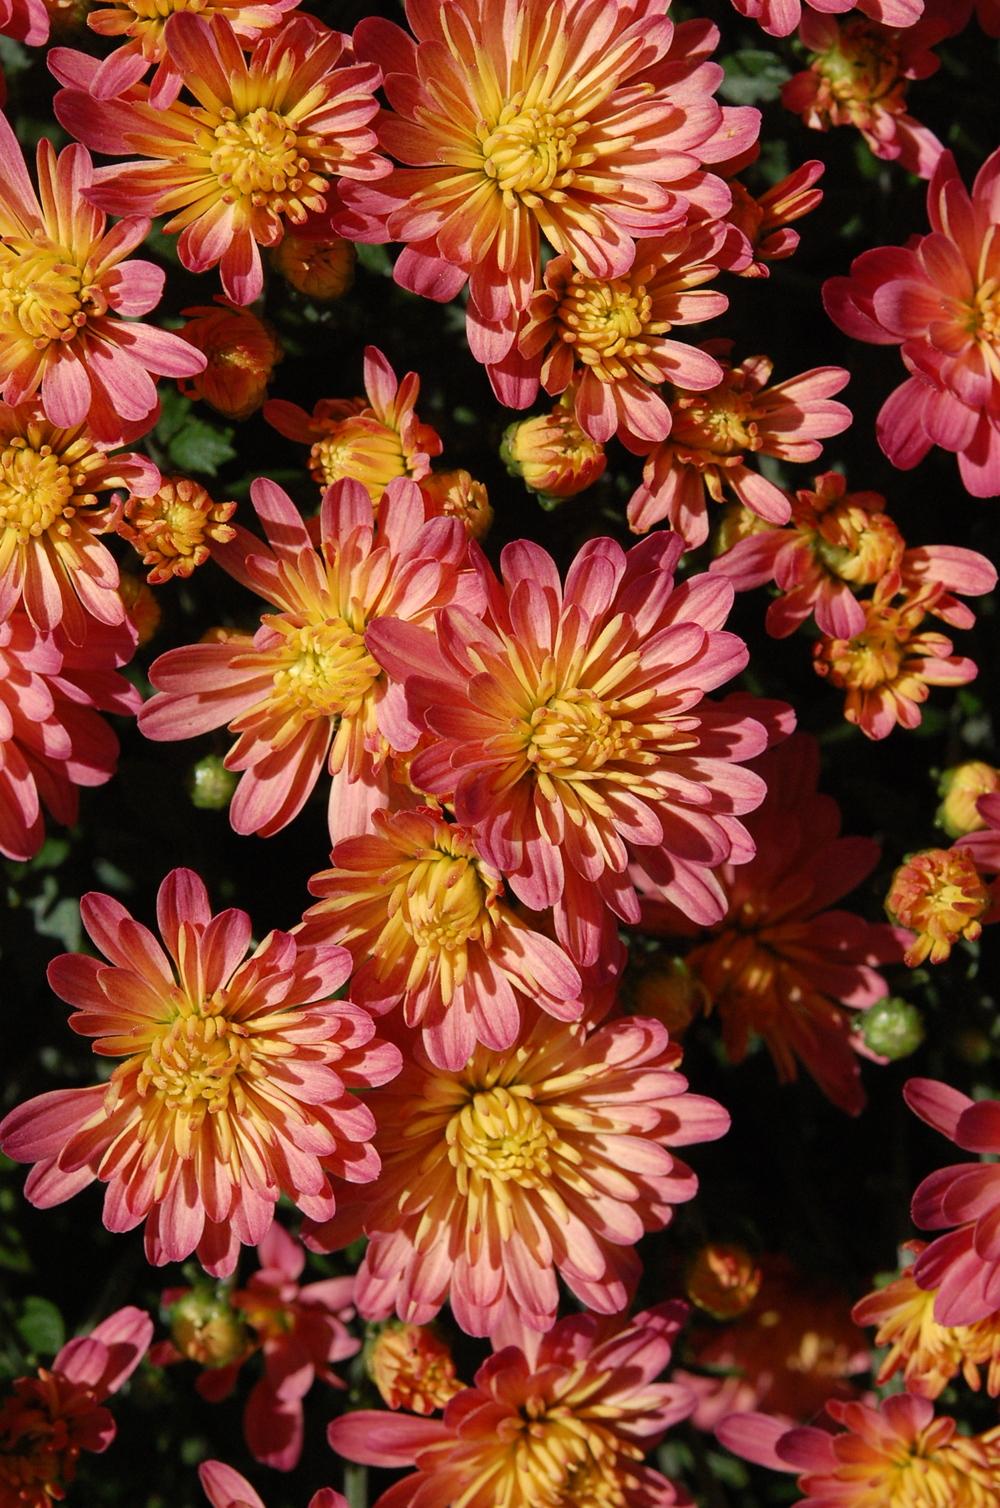 Photo of Chrysanthemum uploaded by pixie62560